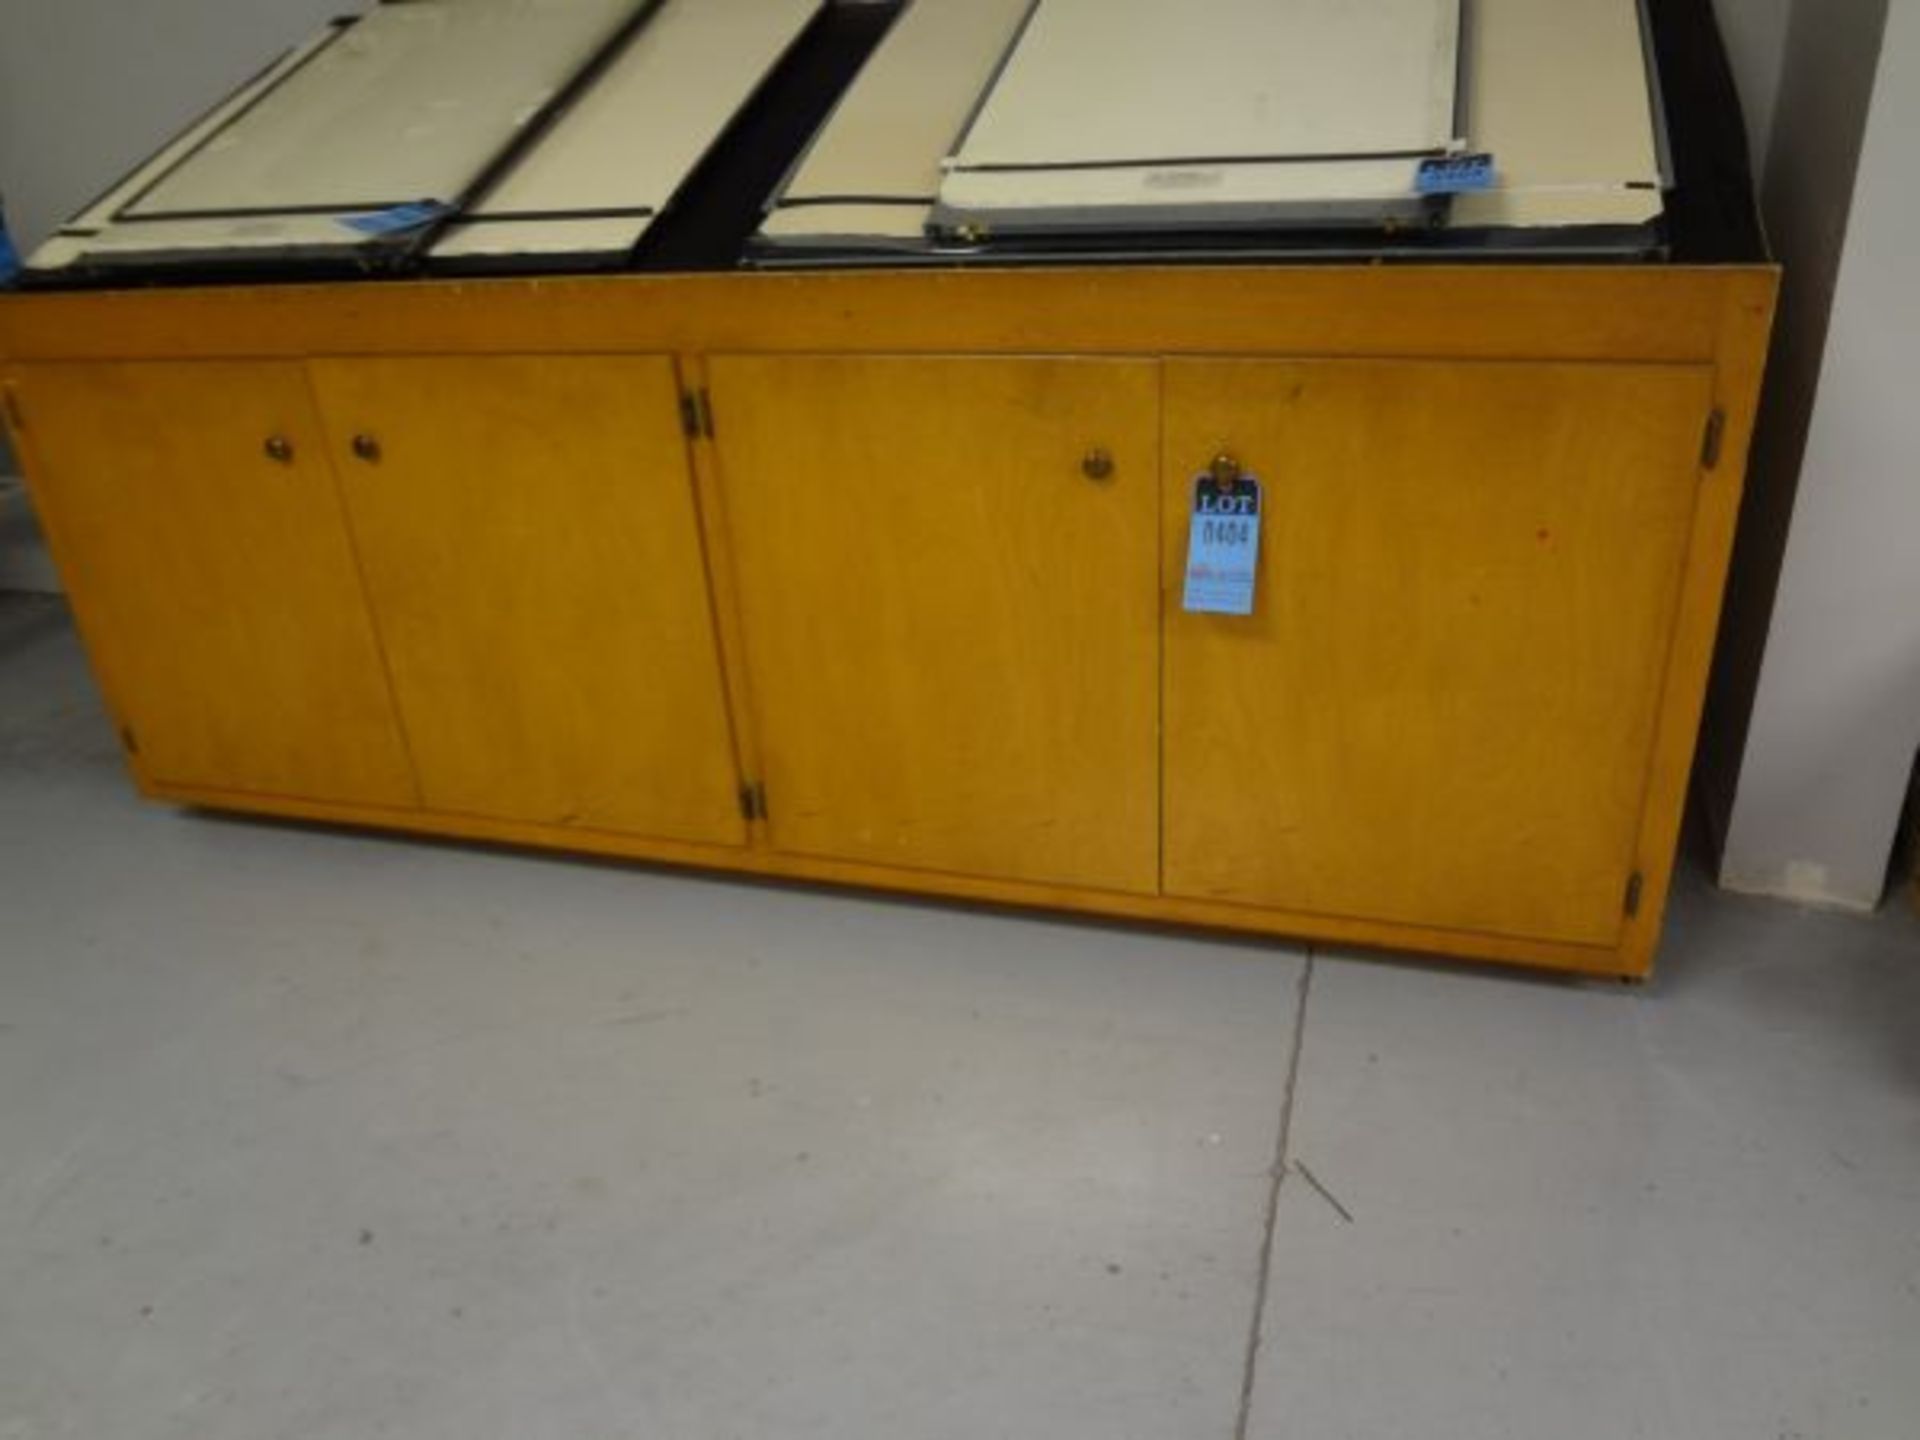 36" X 96" INSPECTION / PAPER STORAGE BENCH